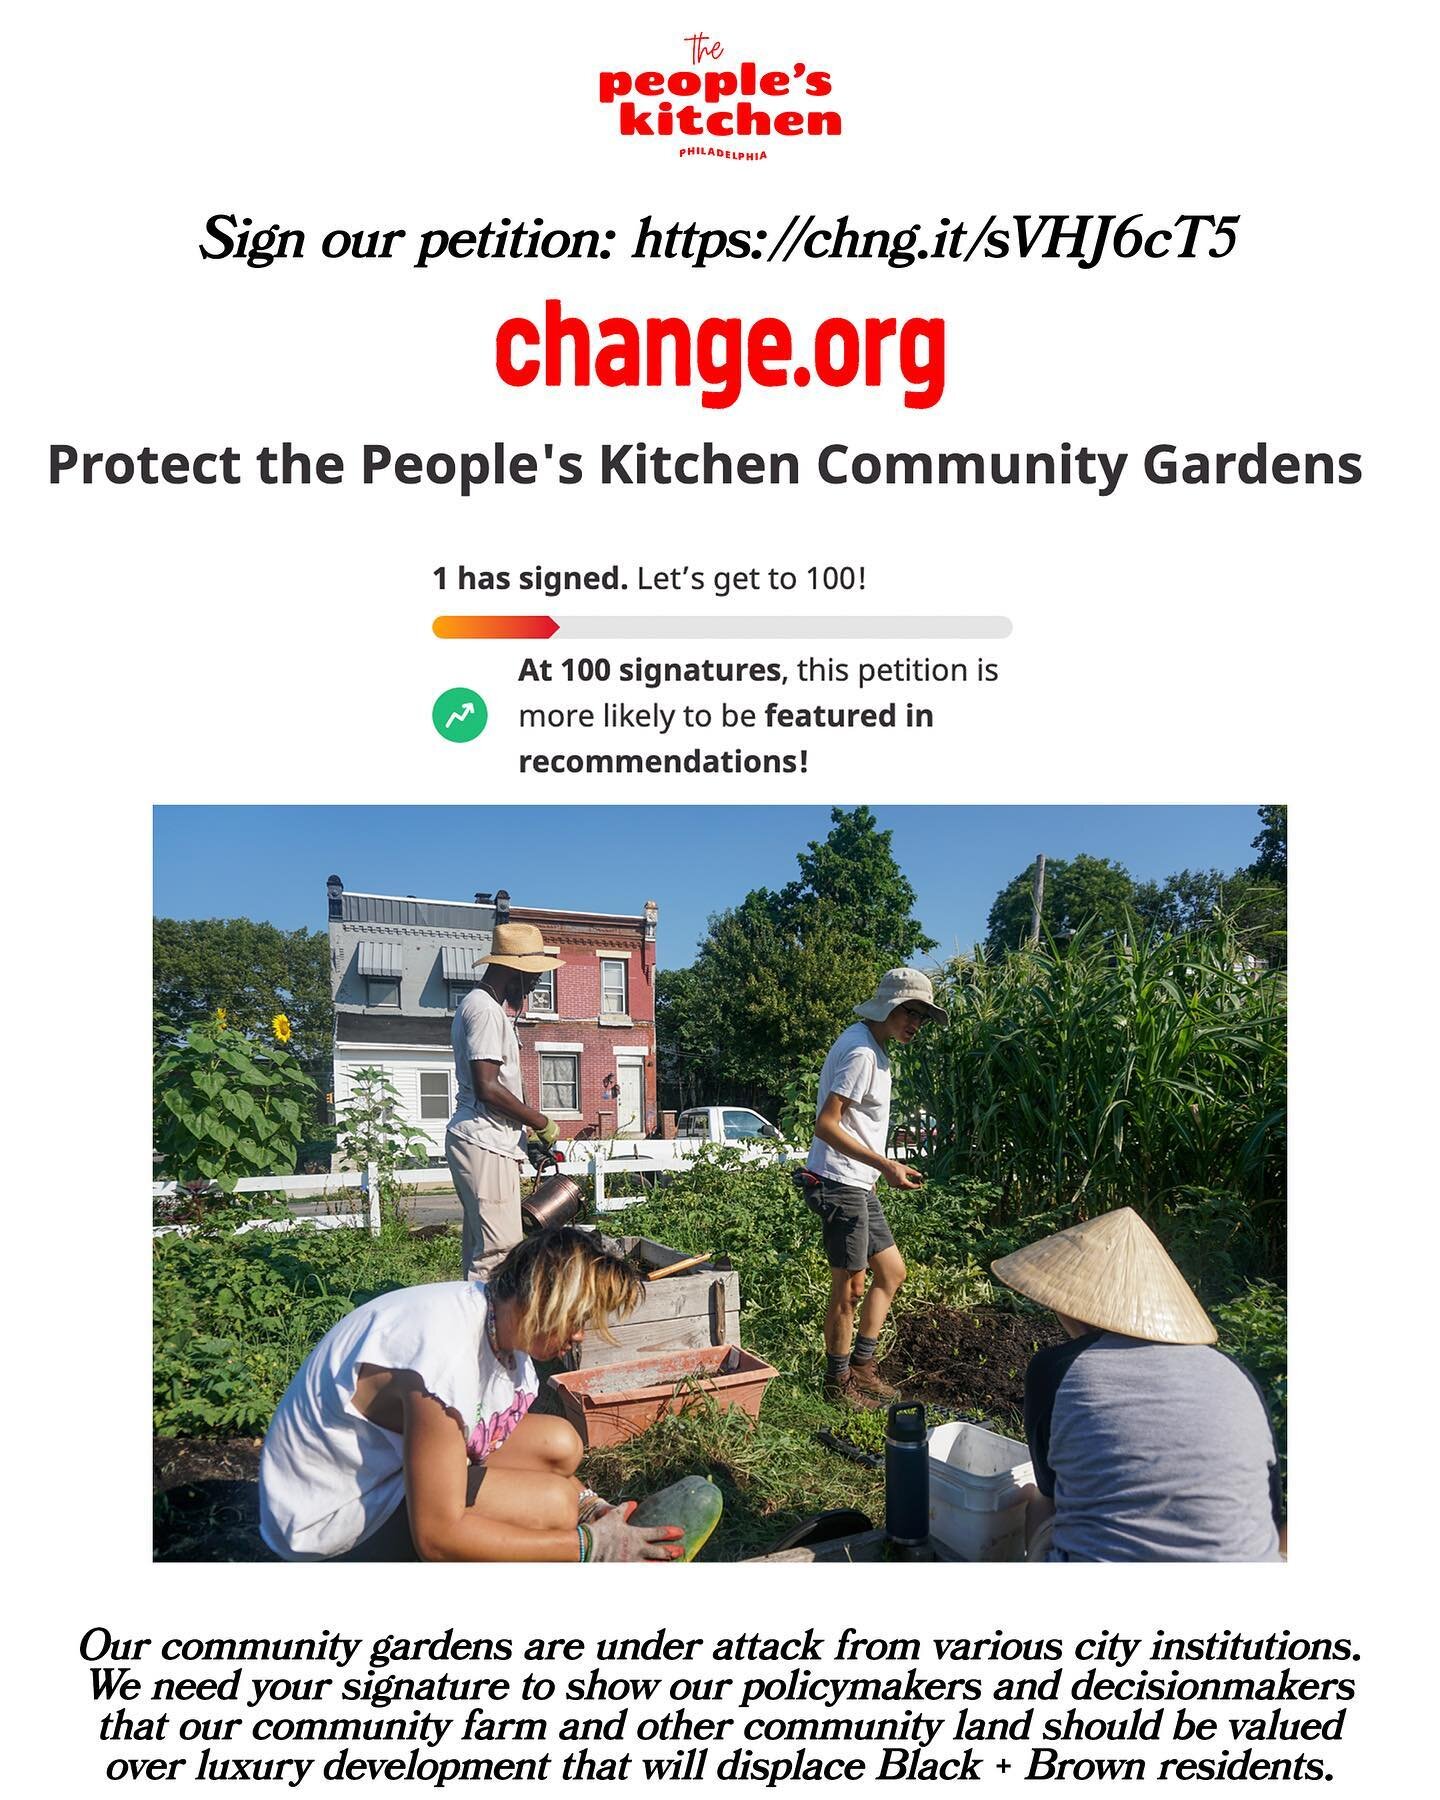 We need your signature! The Sheriff&rsquo;s Office and other city powers want to sell our community land and farm off to developers for luxury housing. We need to show them that we have the support of neighbors, locals, and Philadelphians. Sign this 